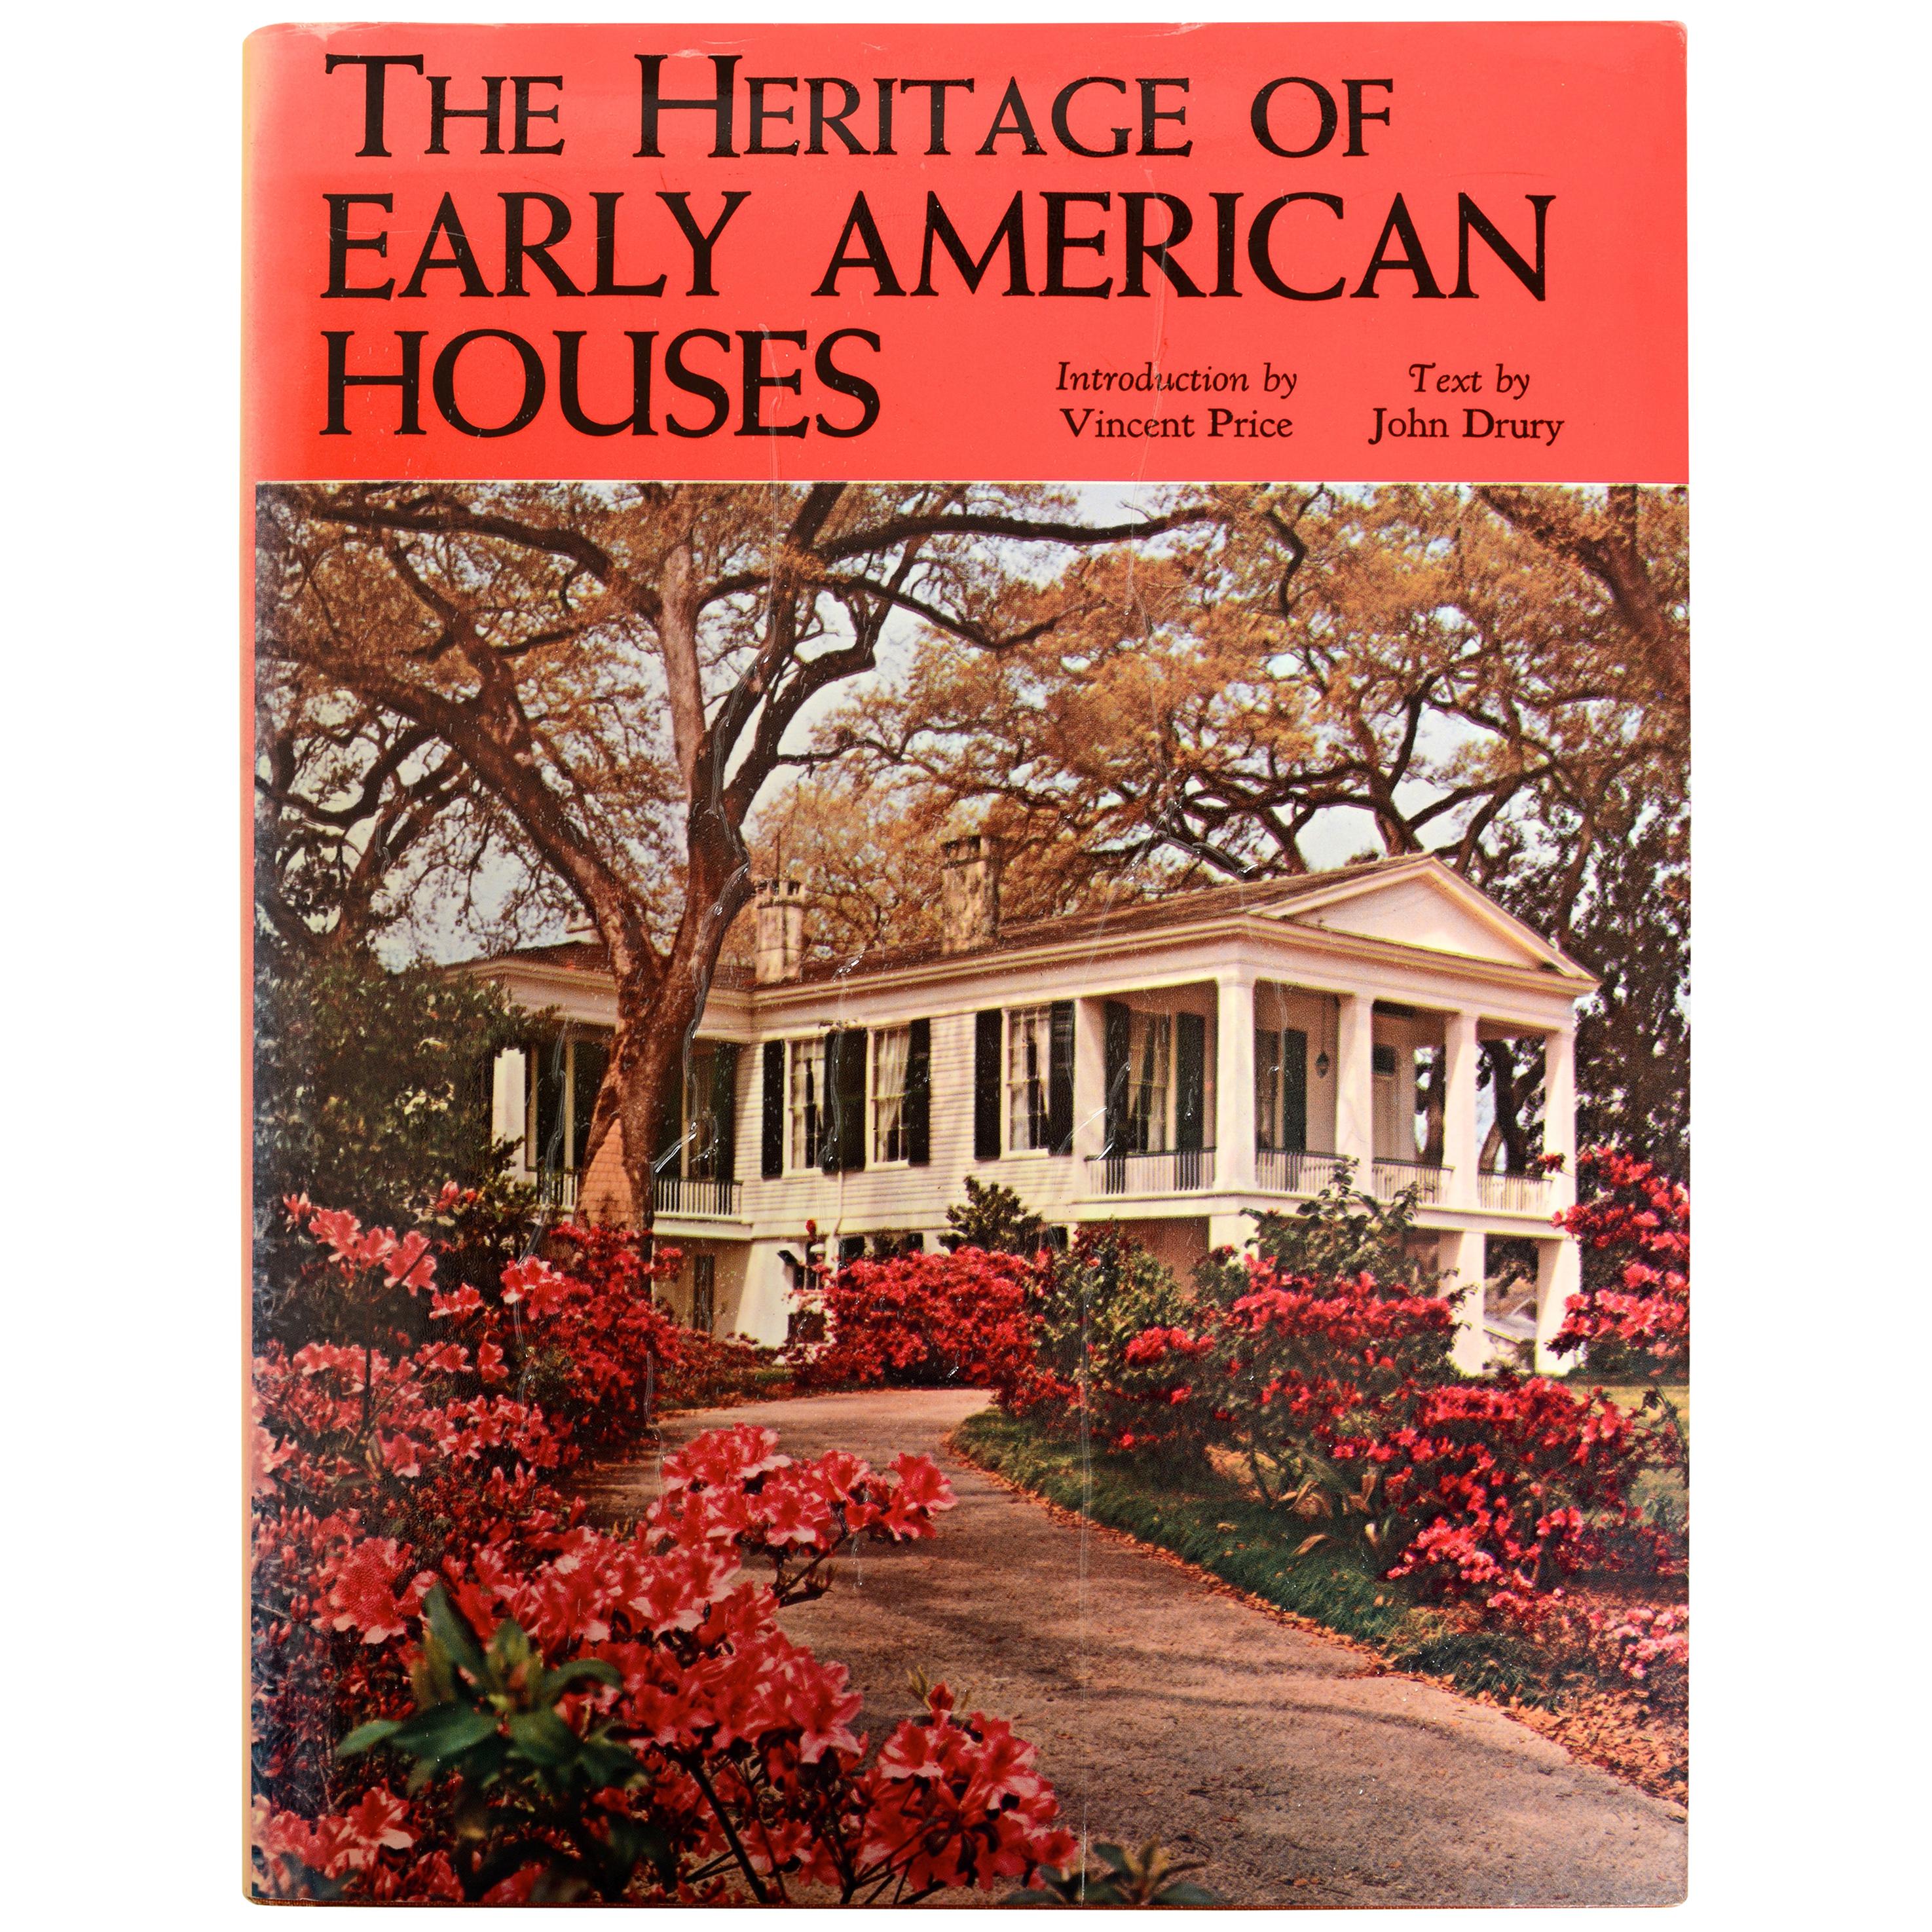 The Heritage of Early American Houses by John Drury, First Edition